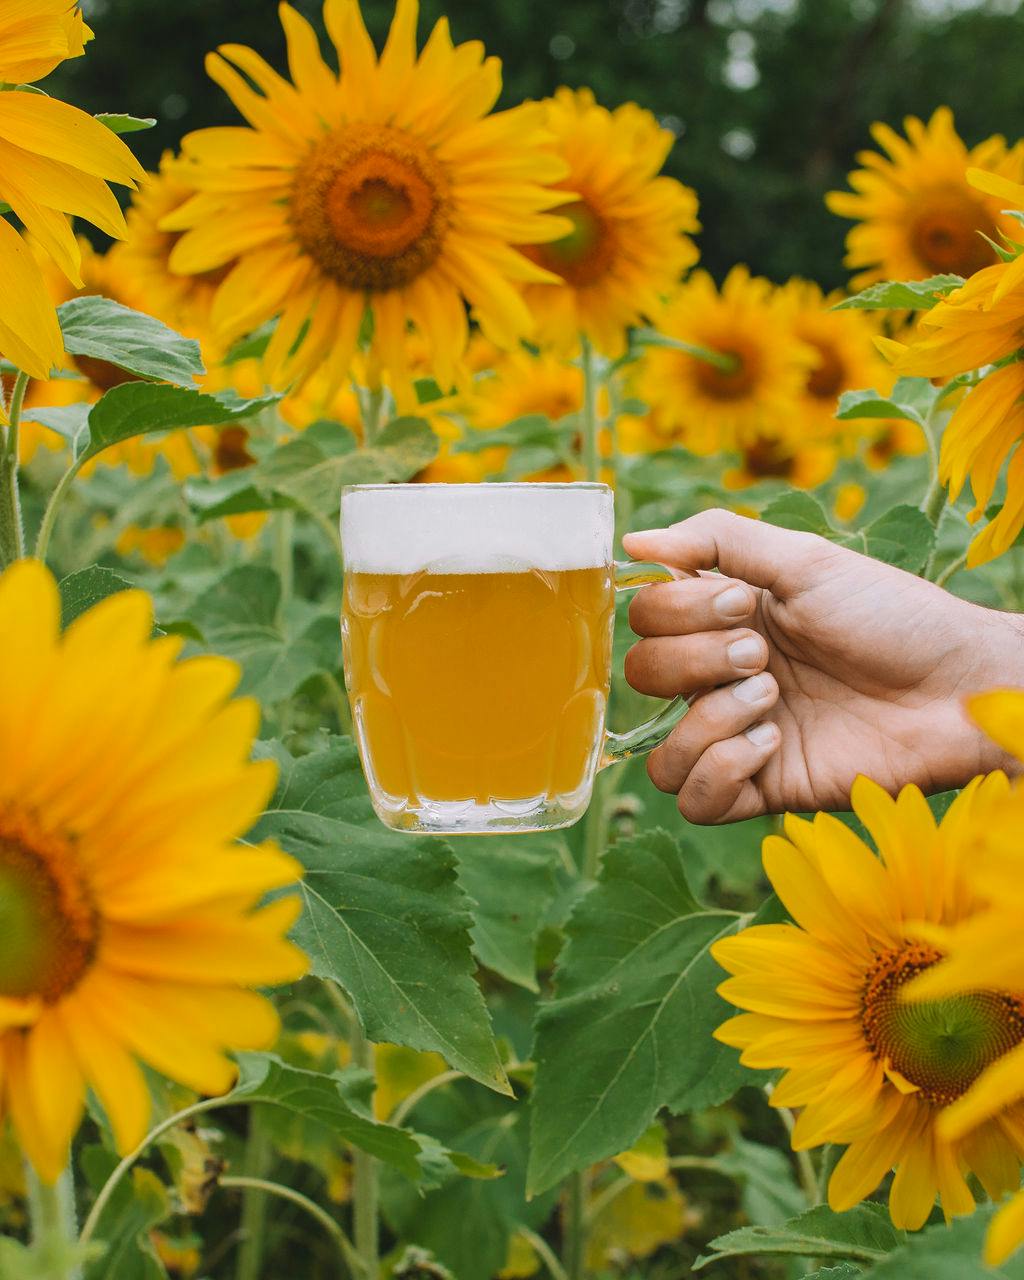 Beer surrounded by sunflowers